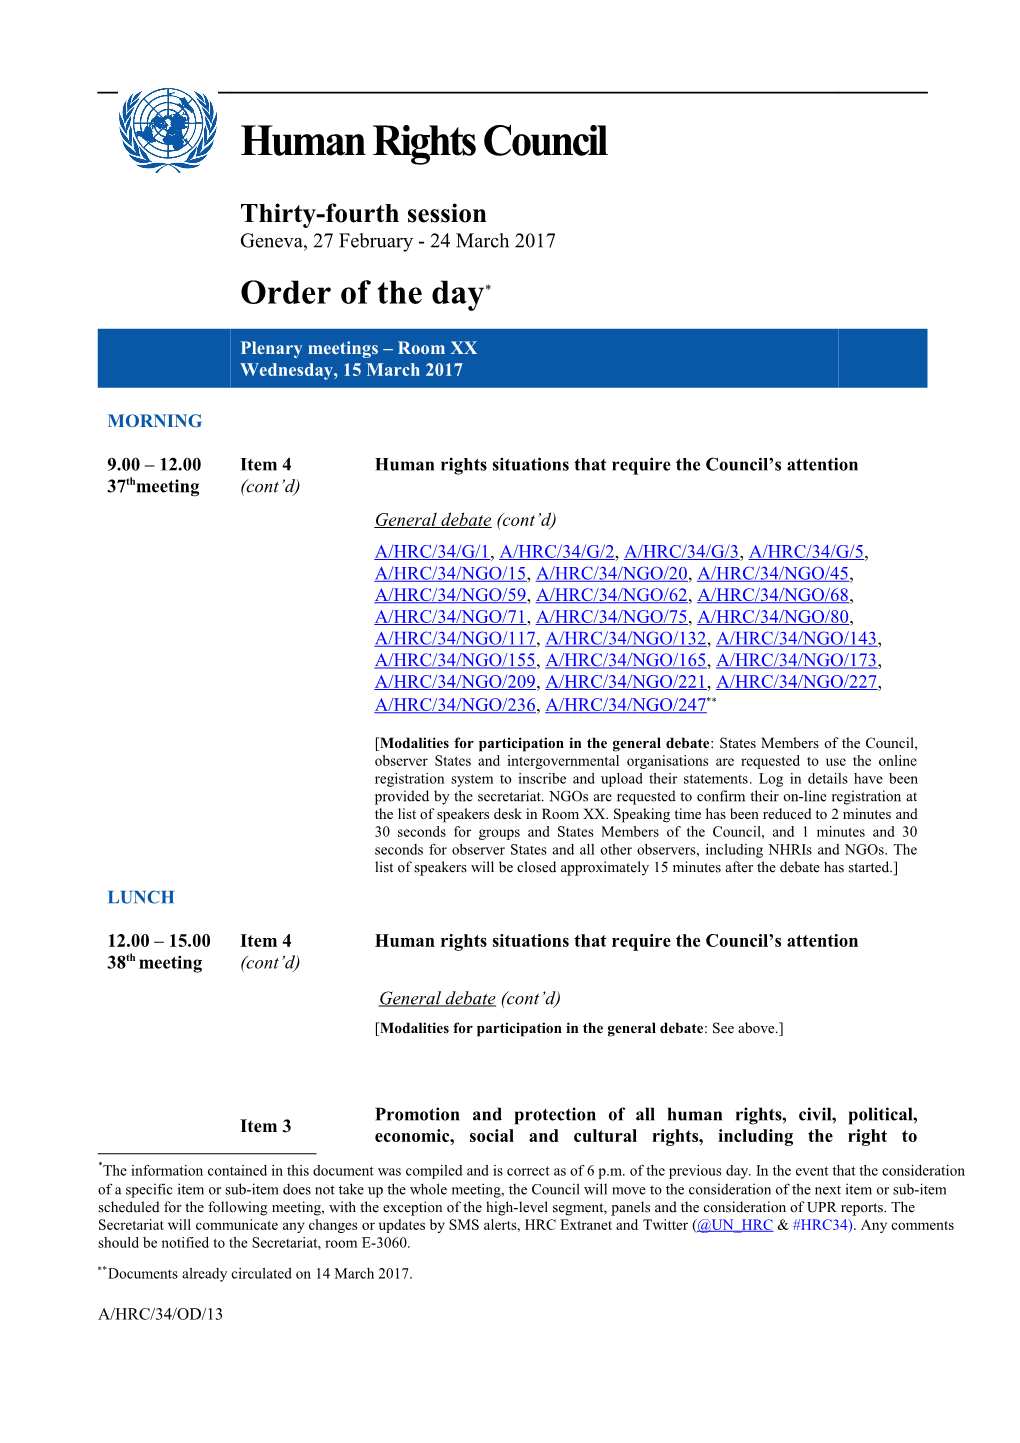 Wednesday, 15 March 2017, Order of the Day